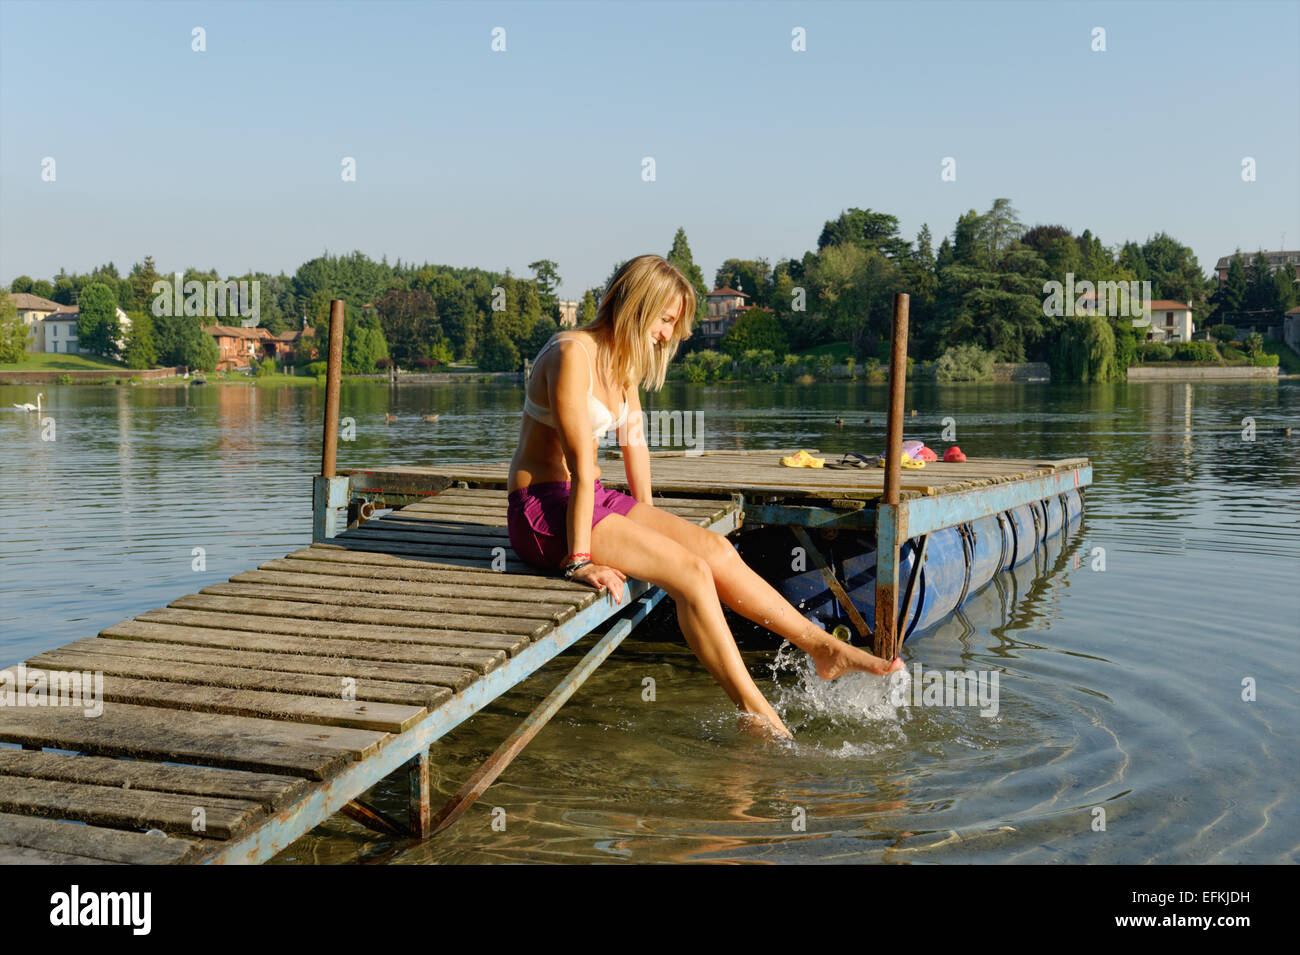 Partially dressed mid adult woman, sitting on jetty, dipping feet in water Stock Photo